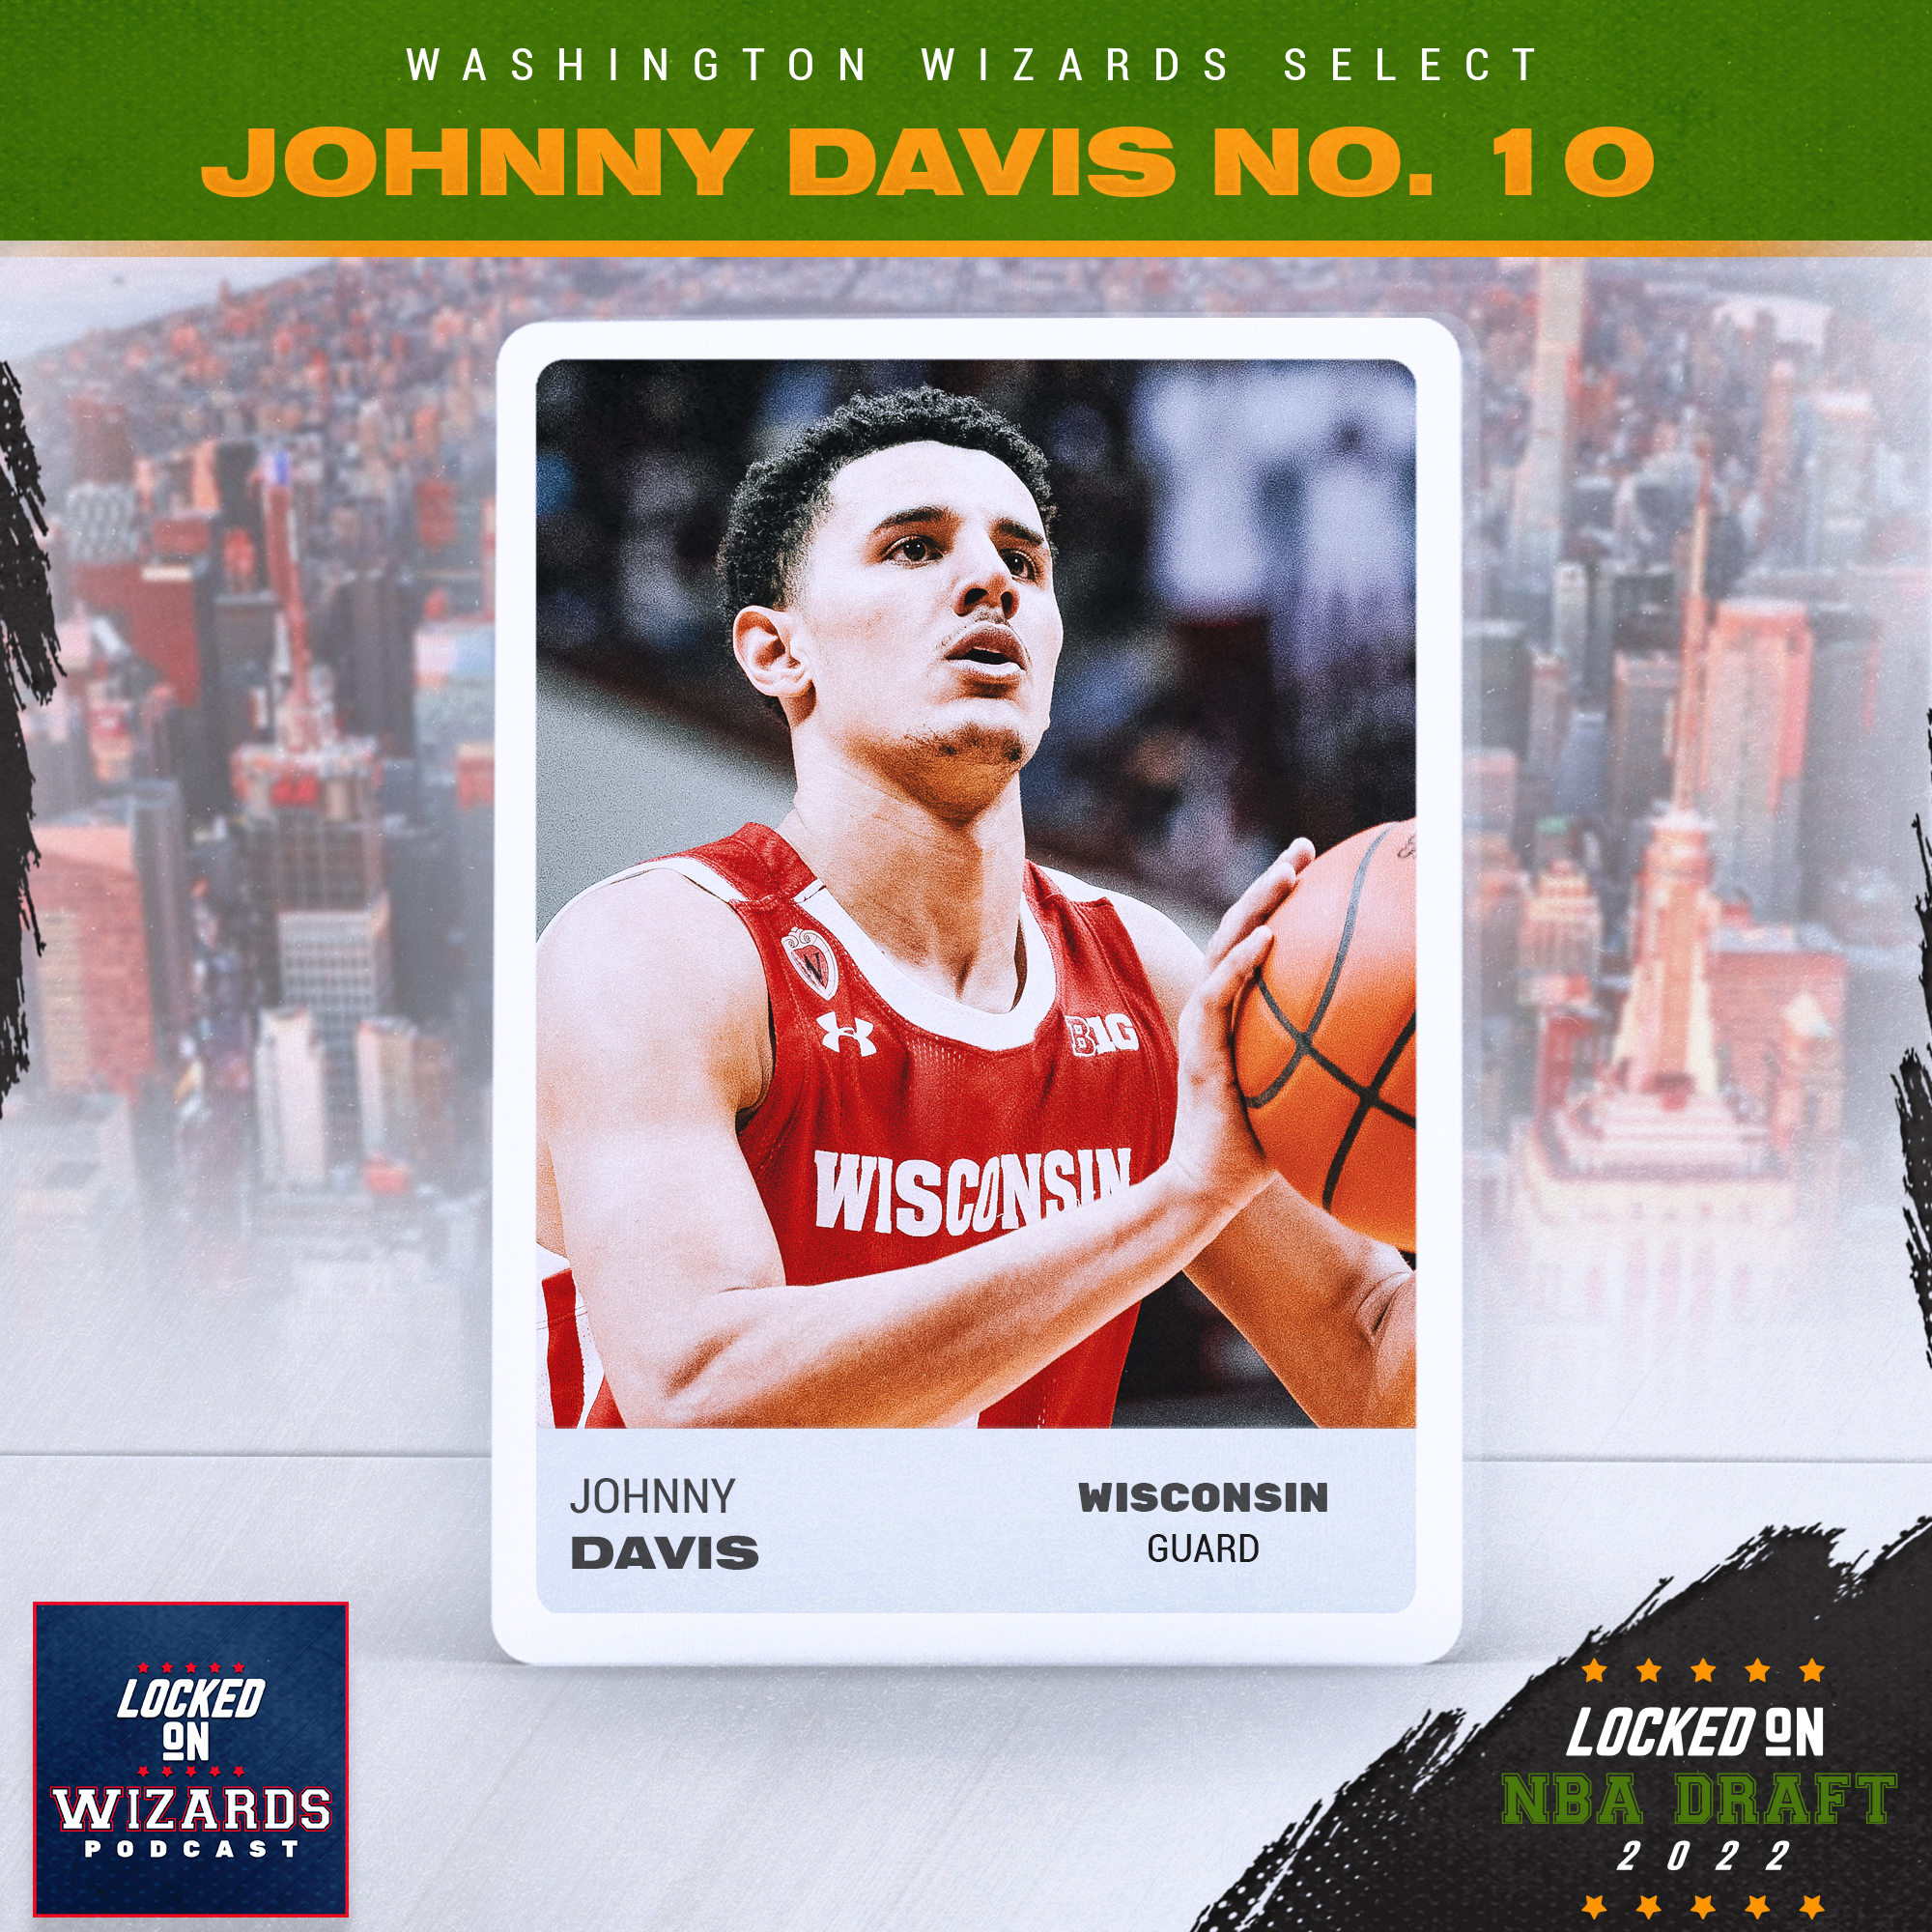 Badgers' Johnny Davis drafted by Washington Wizards